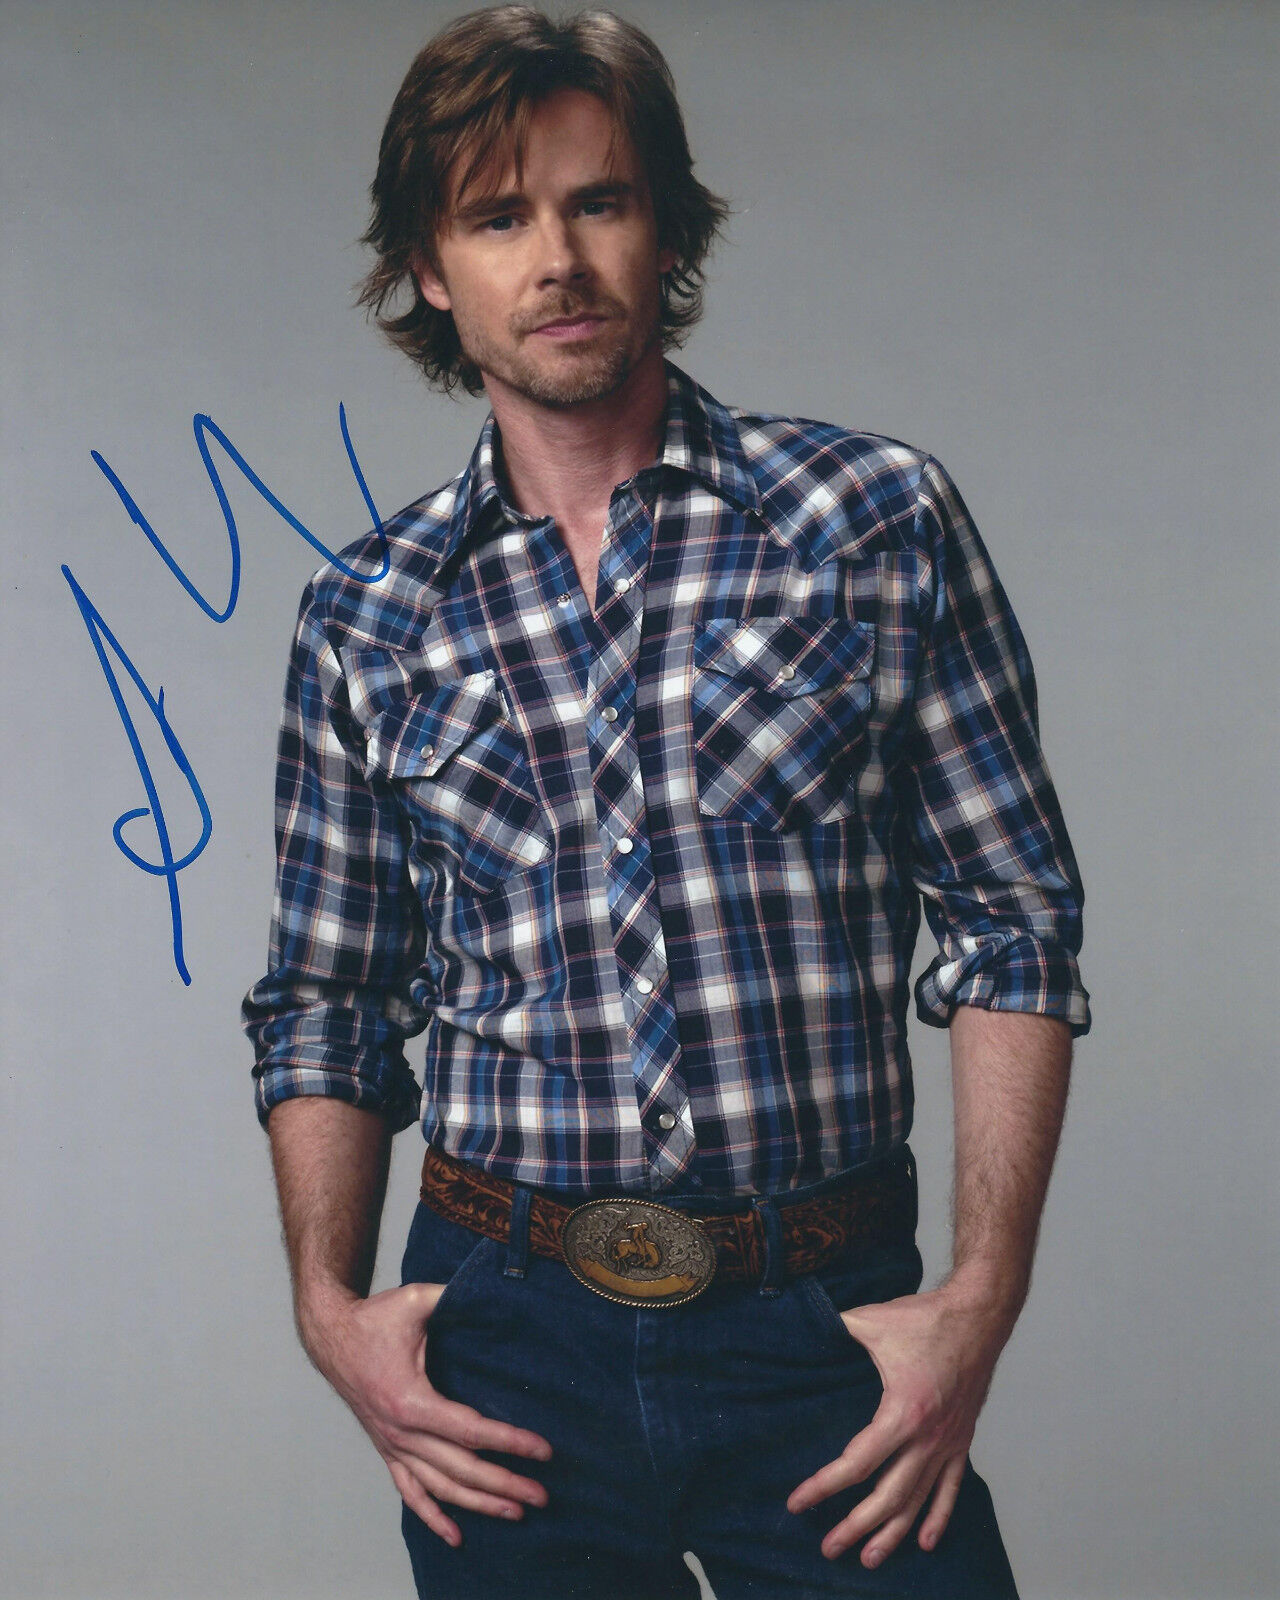 SAM TRAMMELL TRUE BLOOD AUTOGRAPHED Photo Poster painting SIGNED 8X10 #2 SAM MERLOTTE